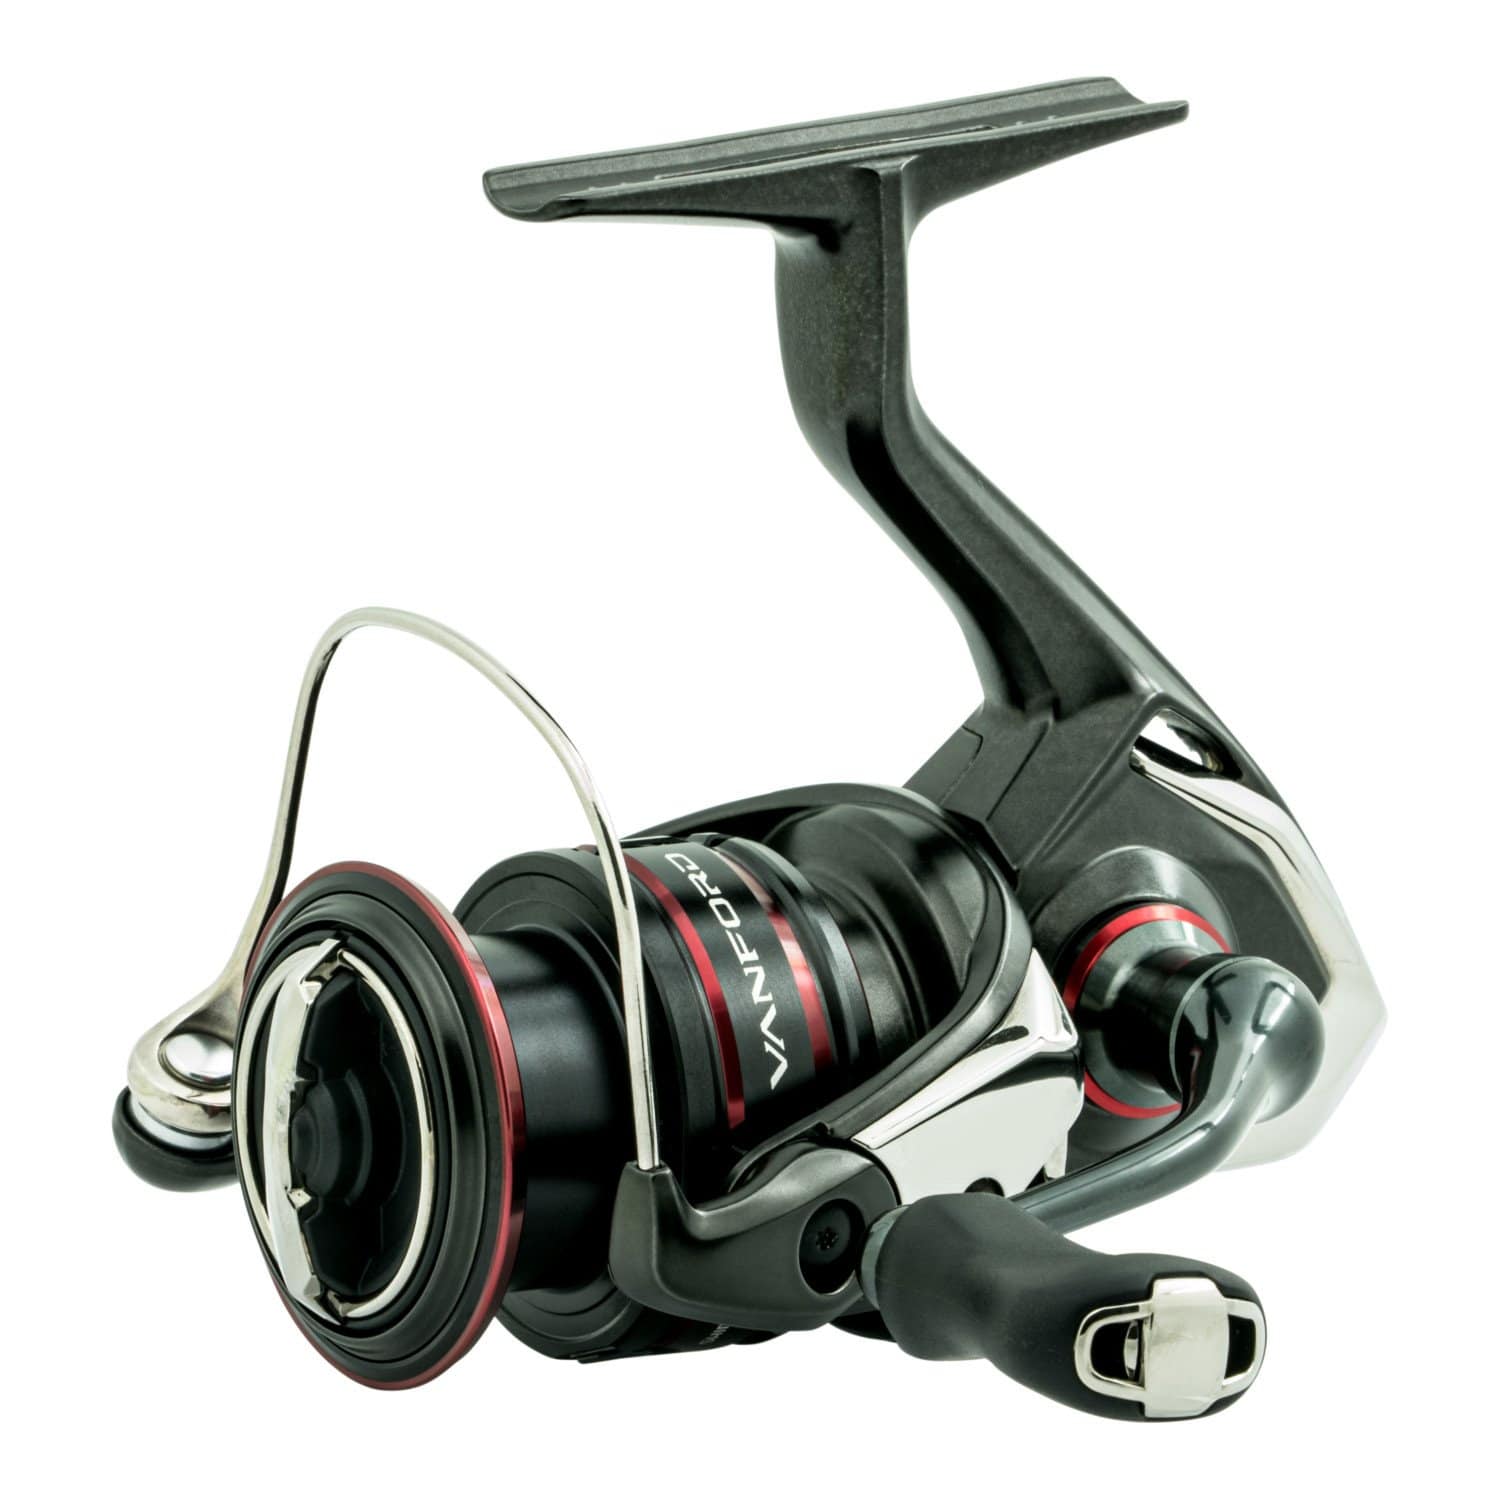 Shimano Vanford Full Review: Is It Better Than The Stradic? 